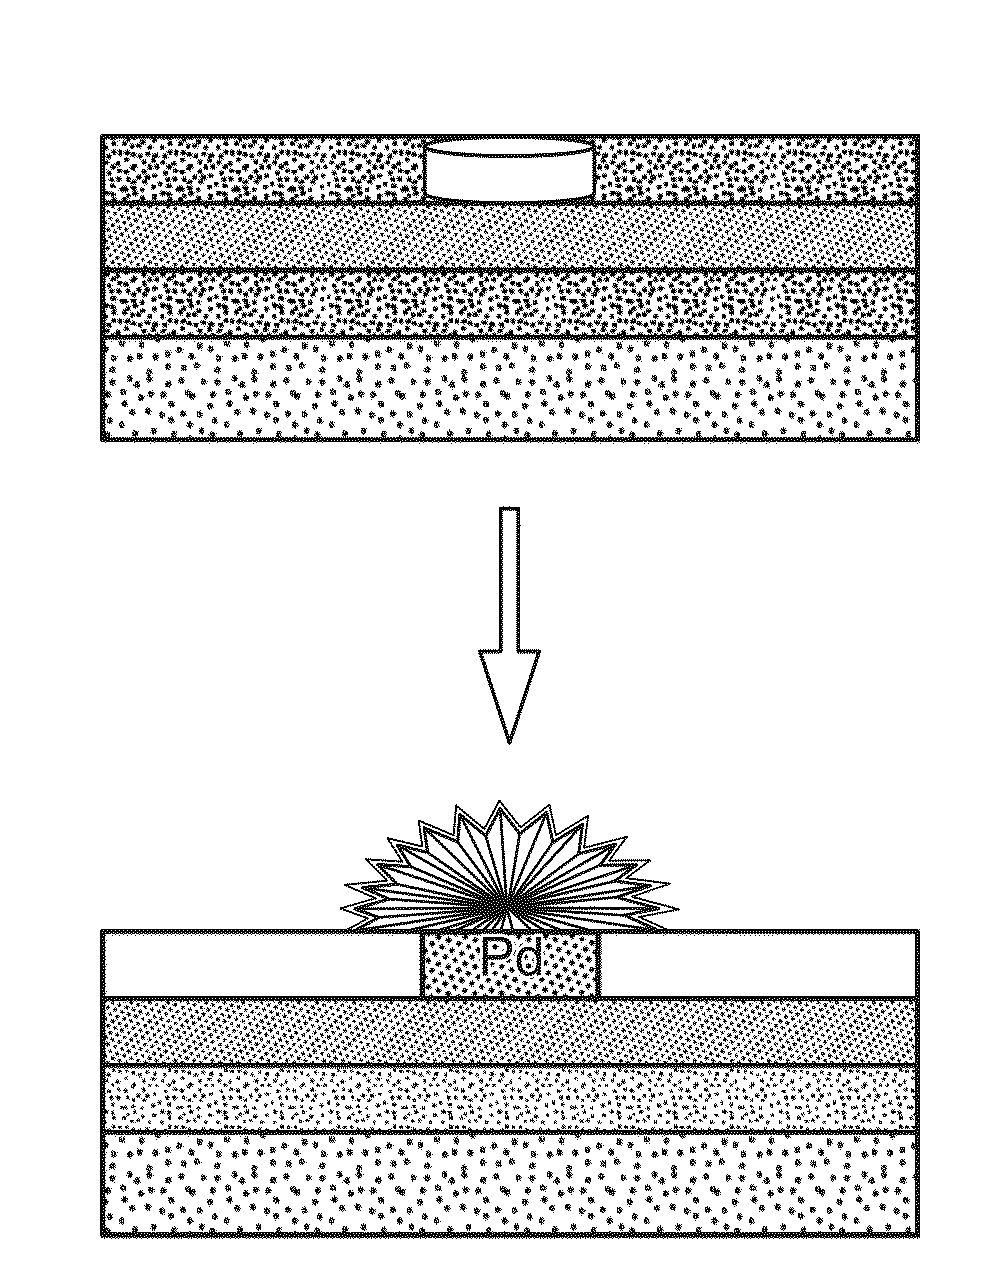 Nanostructured microelectrodes and biosensing devices incorporating the same